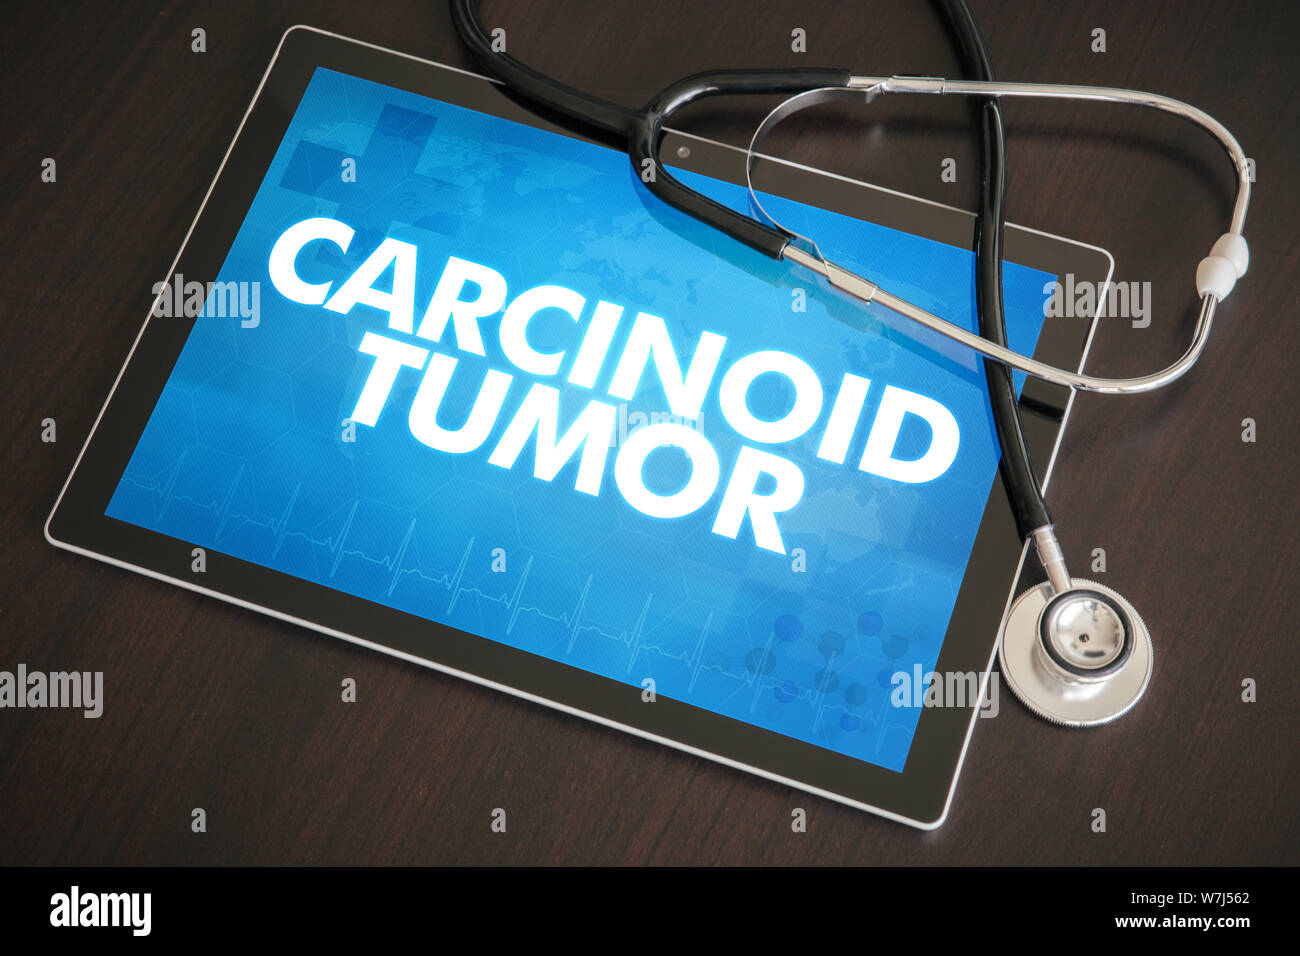 Carcinoid tumor (cancer related) diagnosis medical concept on tablet screen with stethoscope. Stock Photo